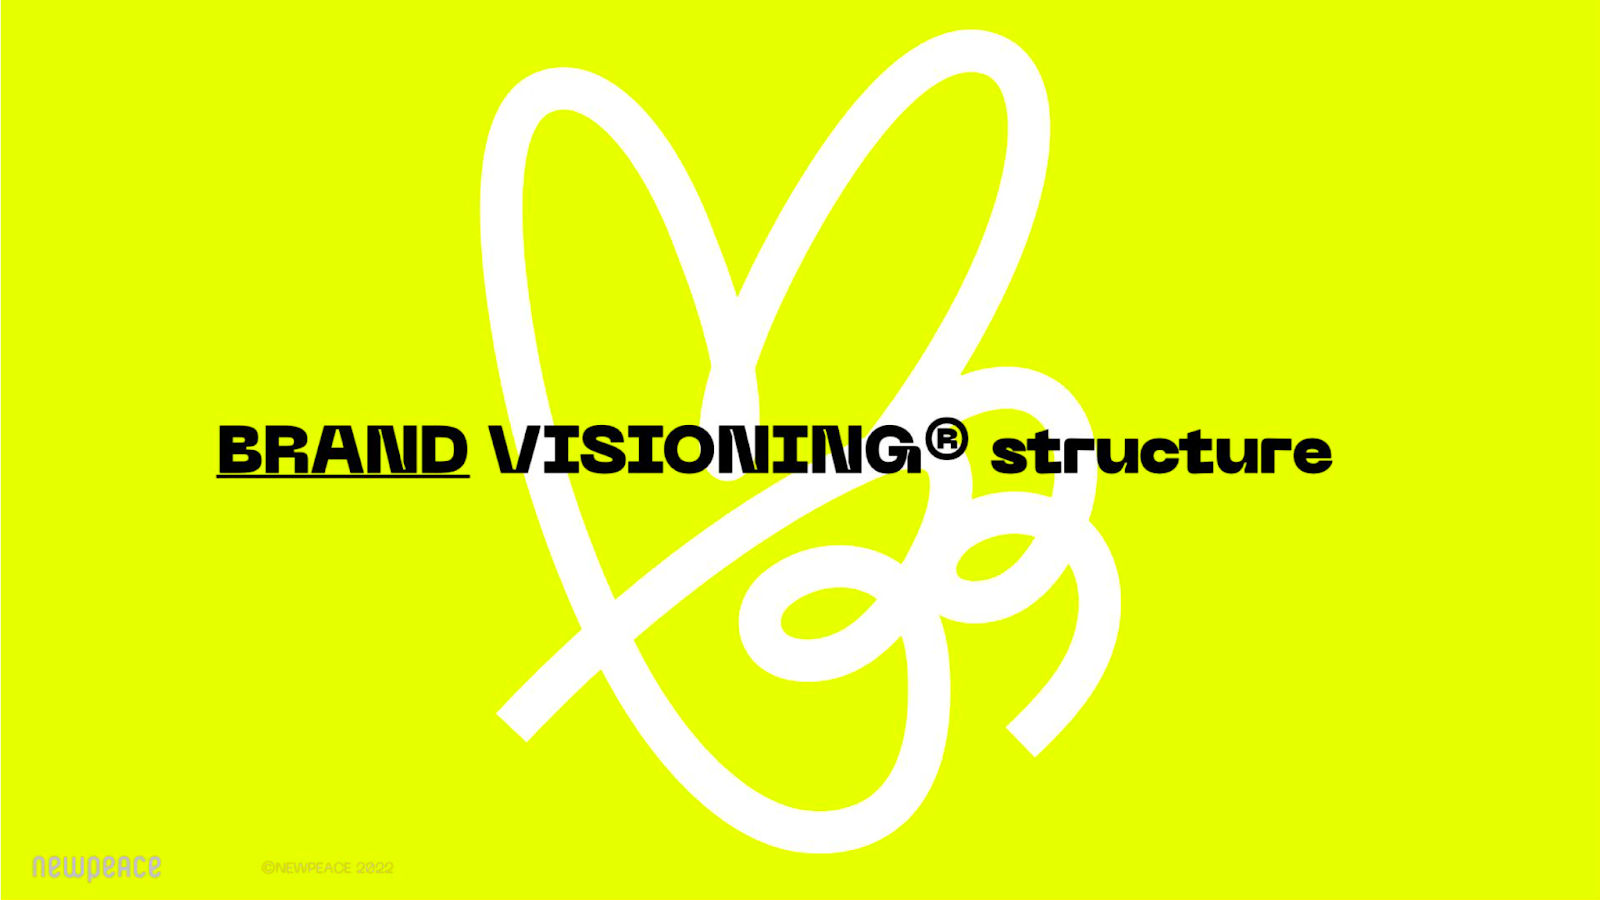  VISIONING structureの資料の一部